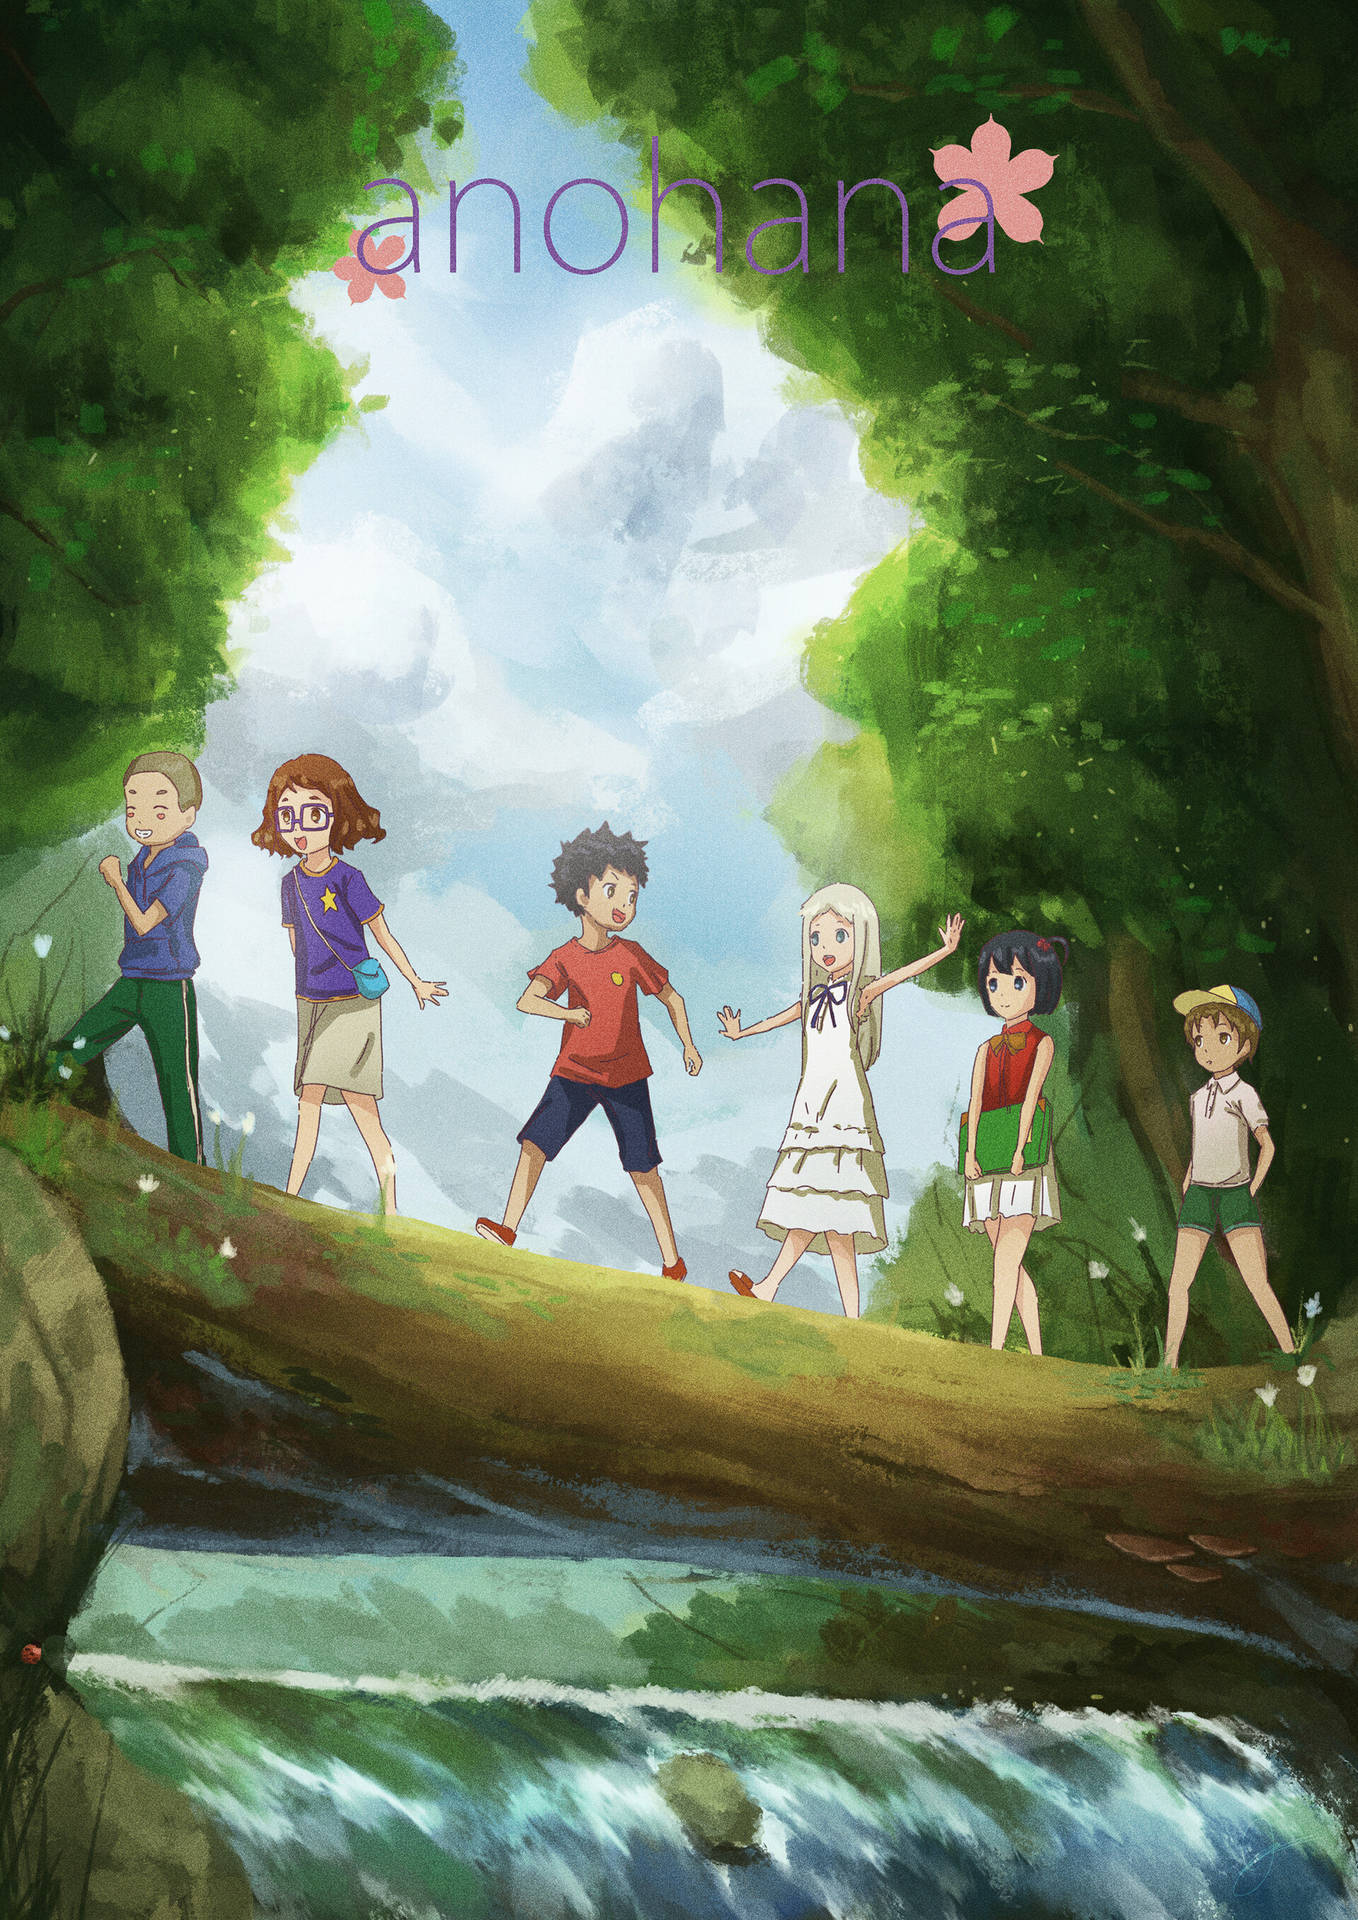 Anohana Characters: A Moment of Friendship Wallpaper